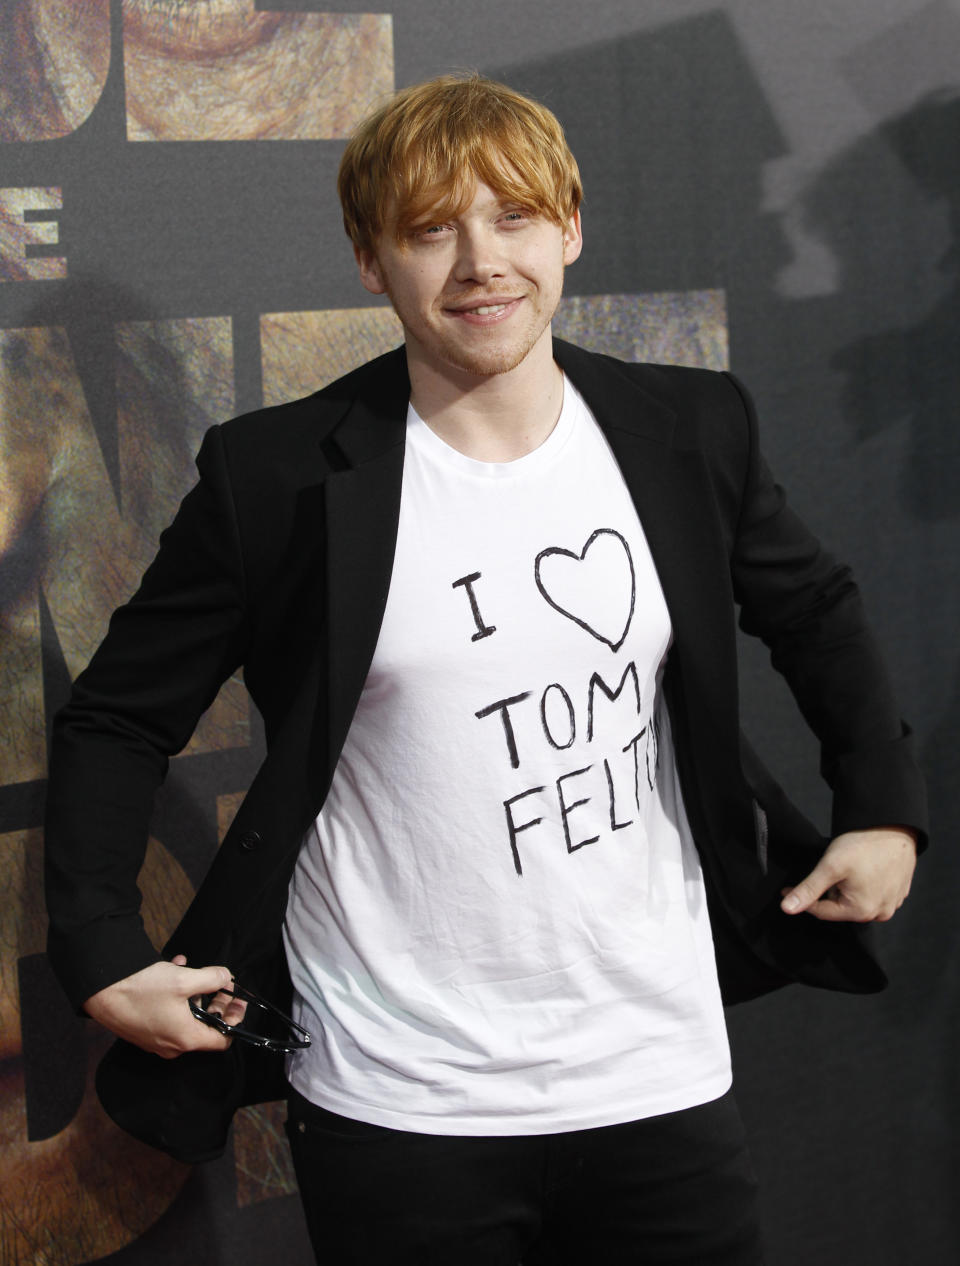 Actor Rupert Grint poses at the premiere of "Rise of the Planet of the Apes" at the Grauman's Chinese theatre in Hollywood, California July 28, 2011. The movie opens in the U.S. on August 5.   REUTERS/Mario Anzuoni (UNITED STATES - Tags: ENTERTAINMENT)